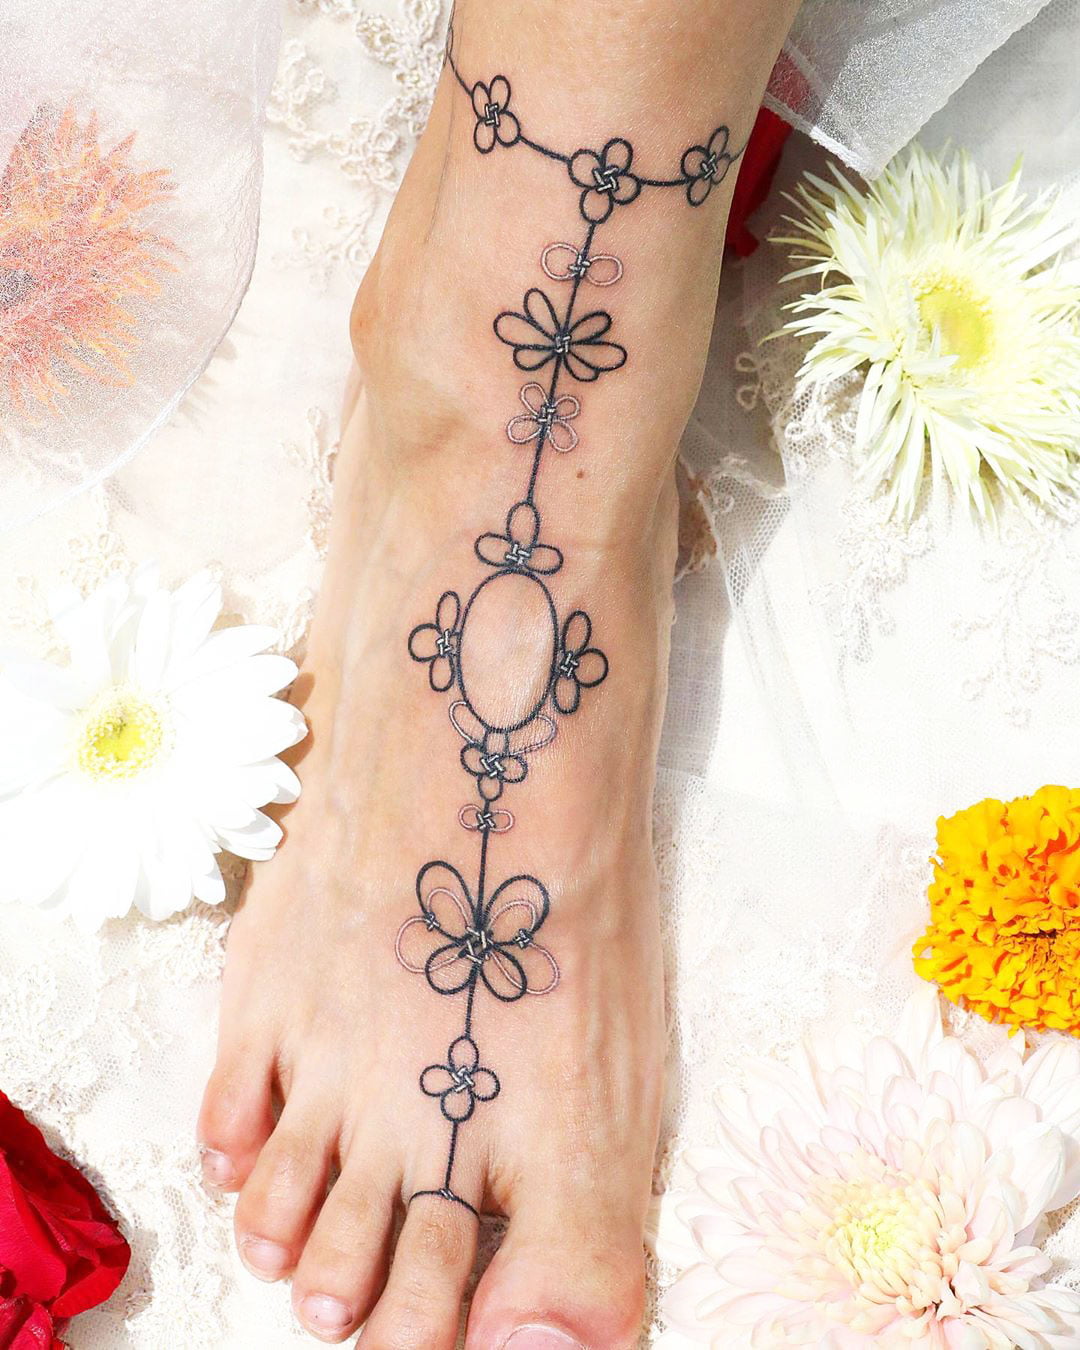 Meaningful Ankle Tattoos - Ankle Tattoo